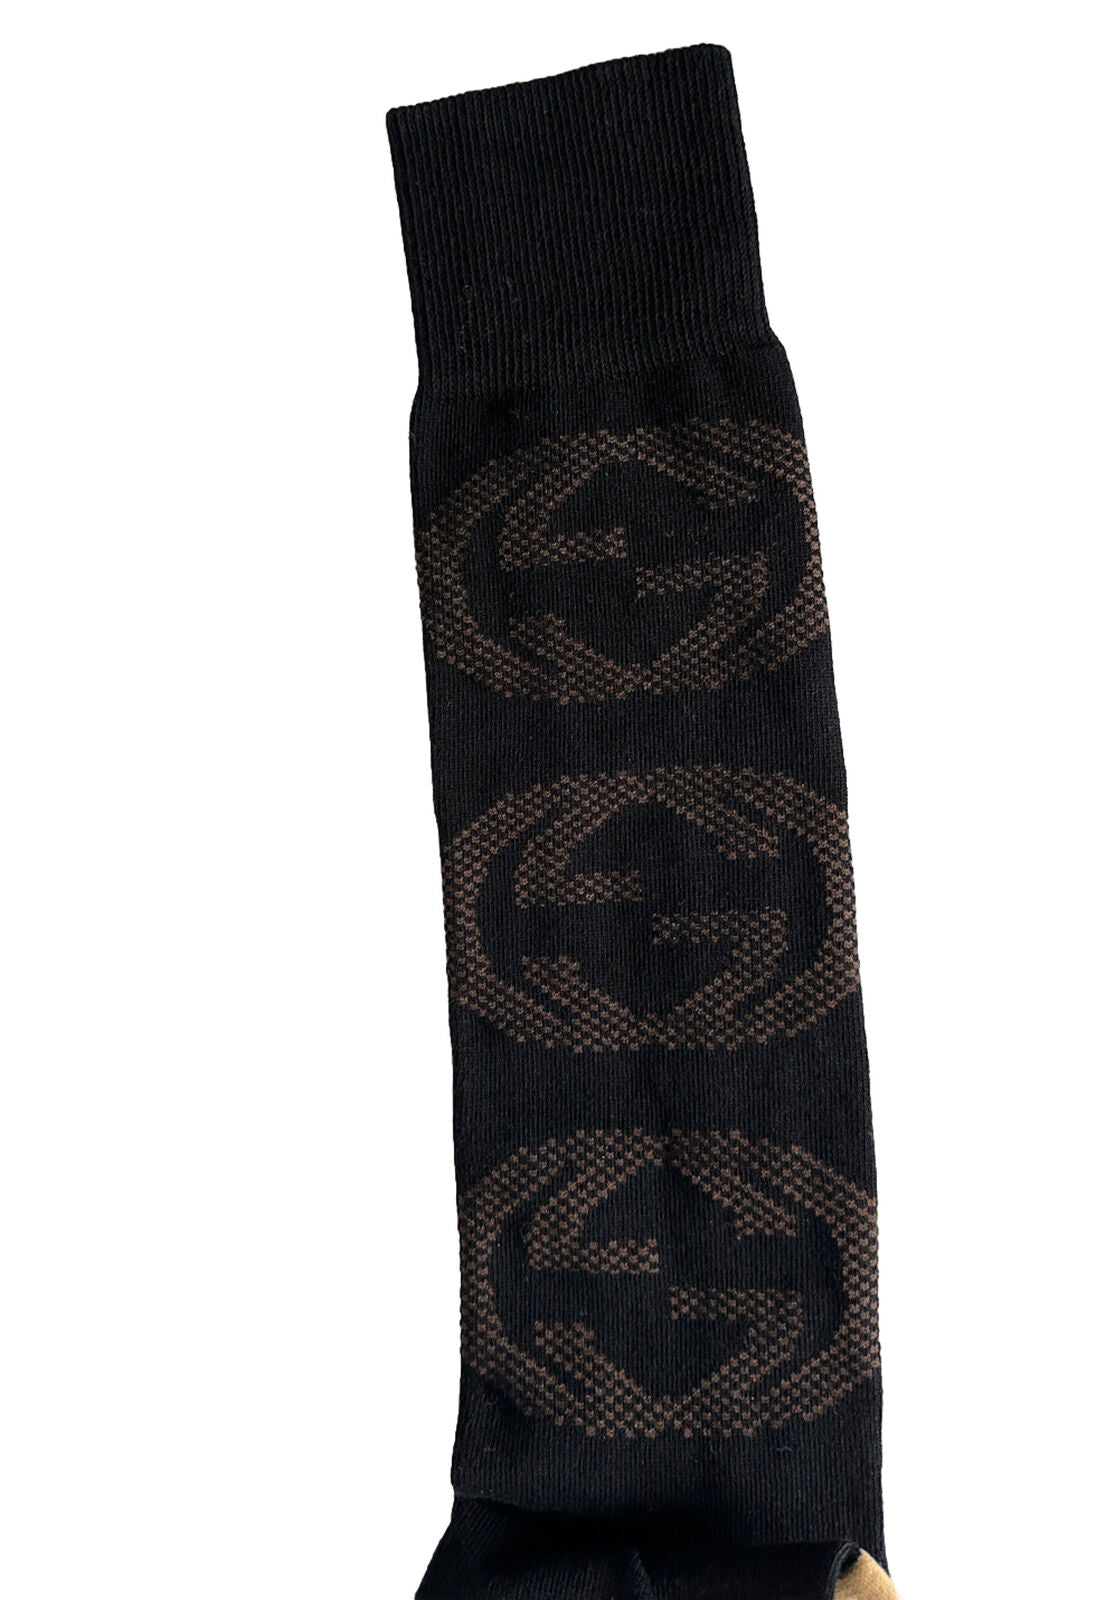 NWT Gucci GG Black/Beige Socks Size S (18-20 cm) Made in Italy 675854